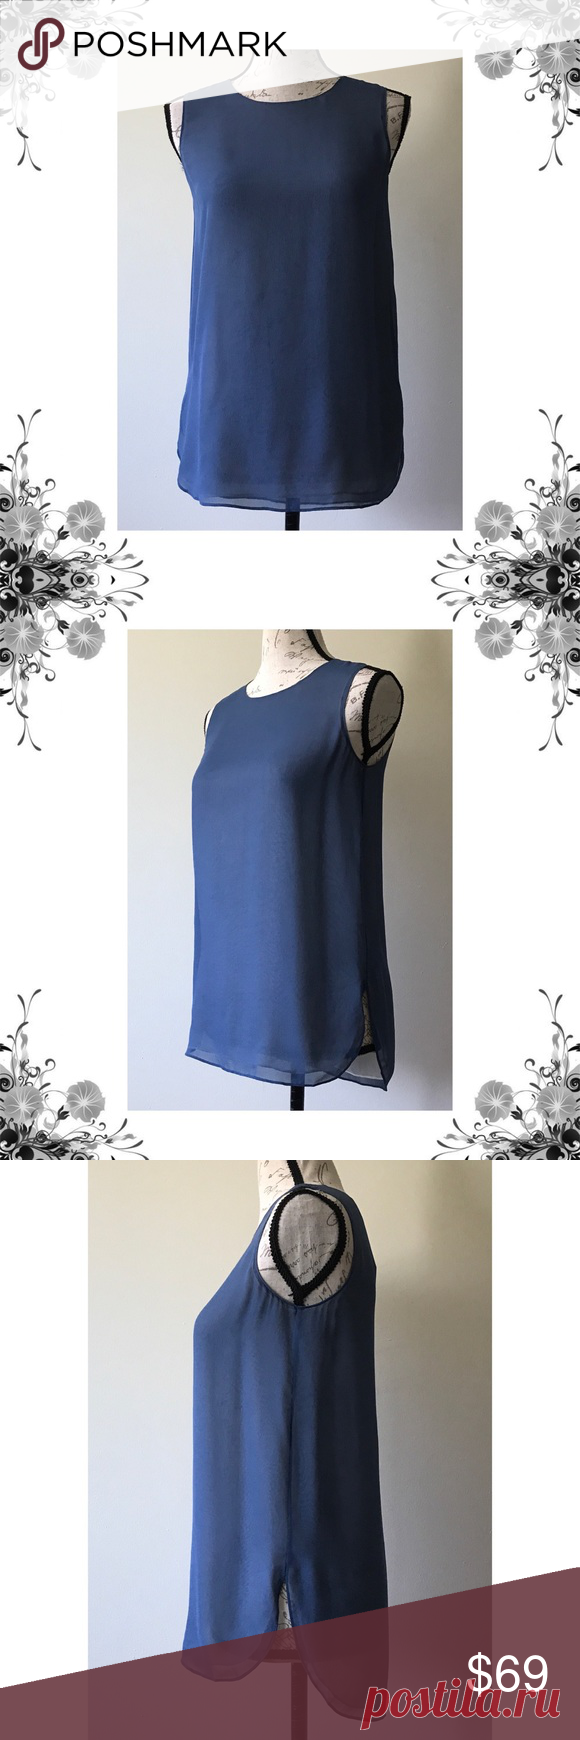 {Vince} Blue Sheer Layered 100% Silk Top New with tags with minor flaw. *Inside tag is partially detached. Please see pics. Chest across measures approx 16.5”. Length is approx 25” in the front and 26.5” in the back. Sleeveless. Layered. 100% Silk. Button keyhole closure at back. Bundle for discounts! 5lb bundle weight limit. Thank you for shopping my closet!  Bin 70 Vince Tops Blouses